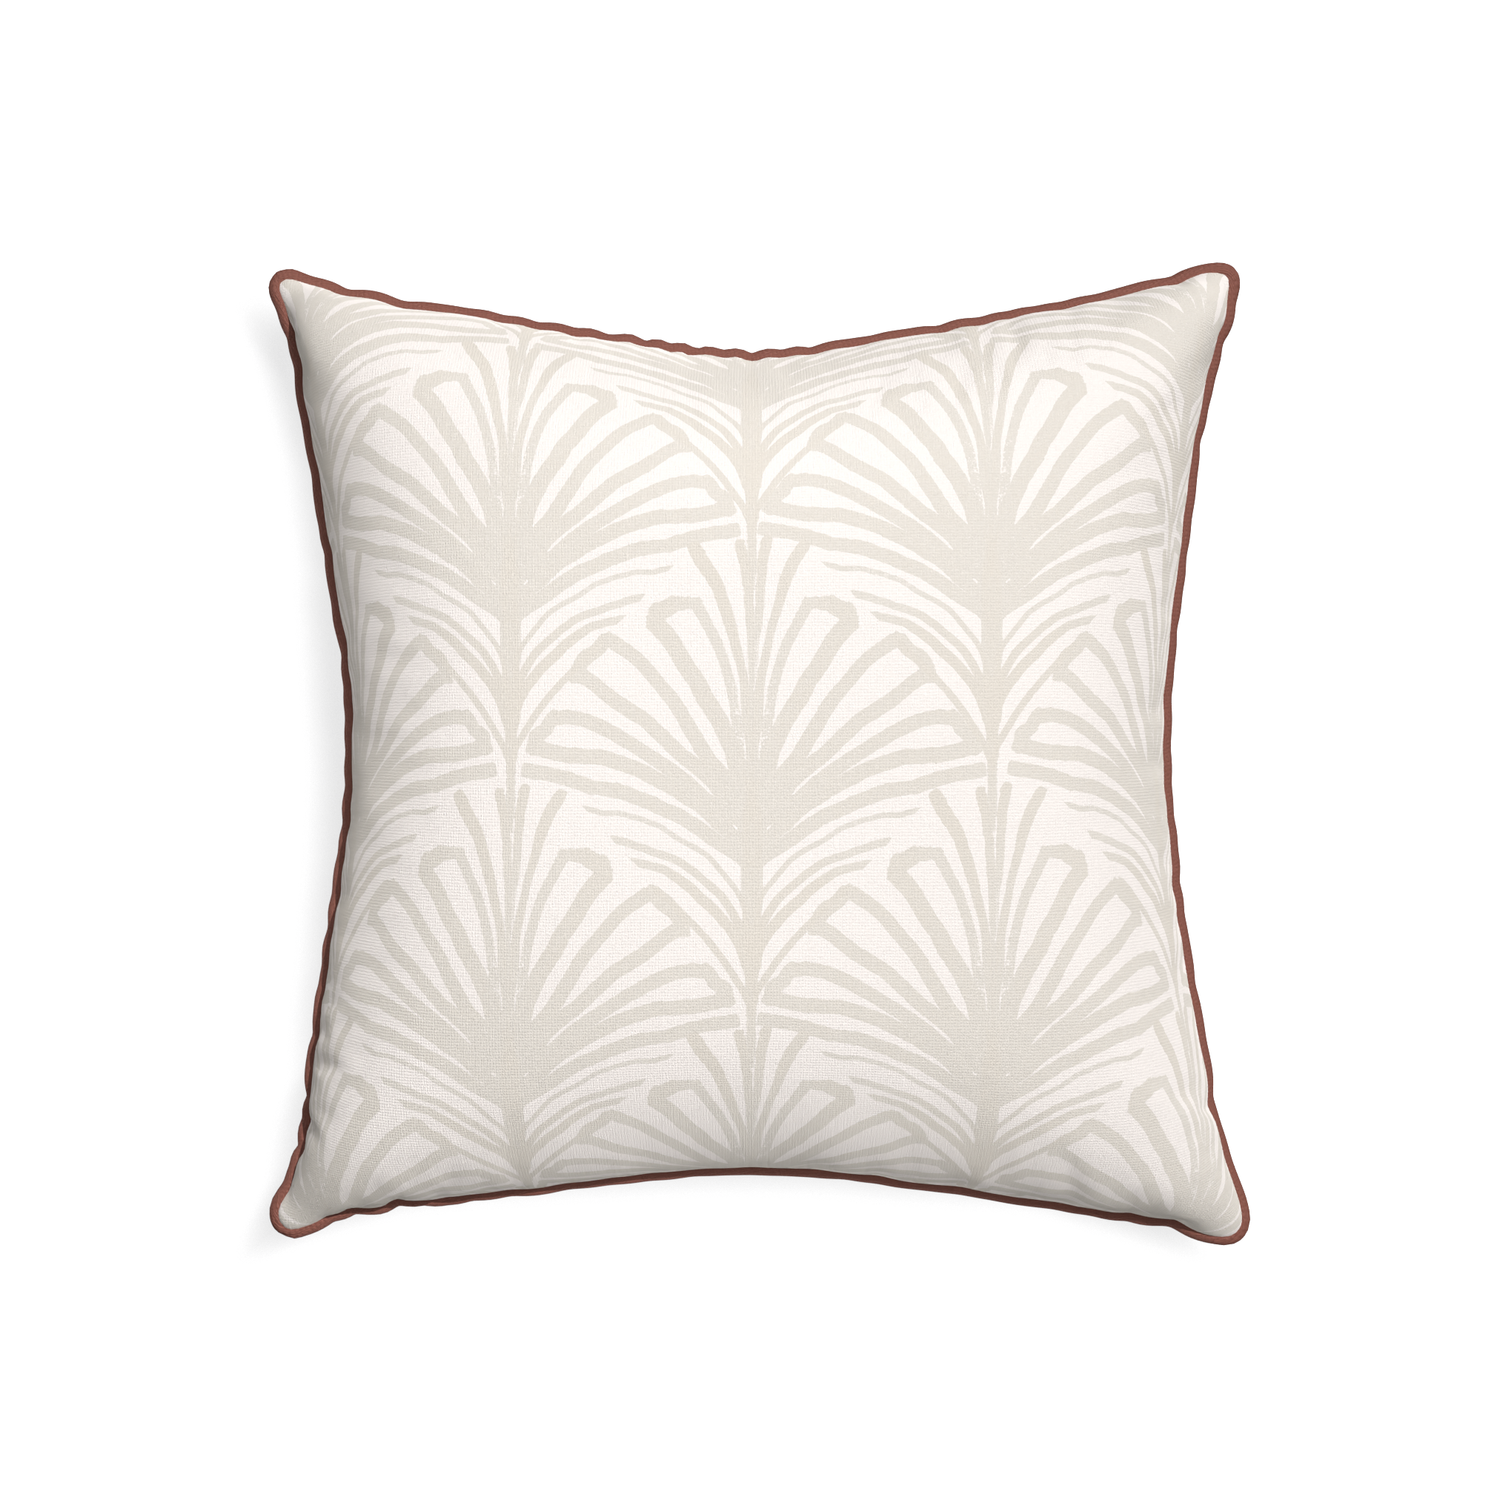 22-square suzy sand custom pillow with w piping on white background